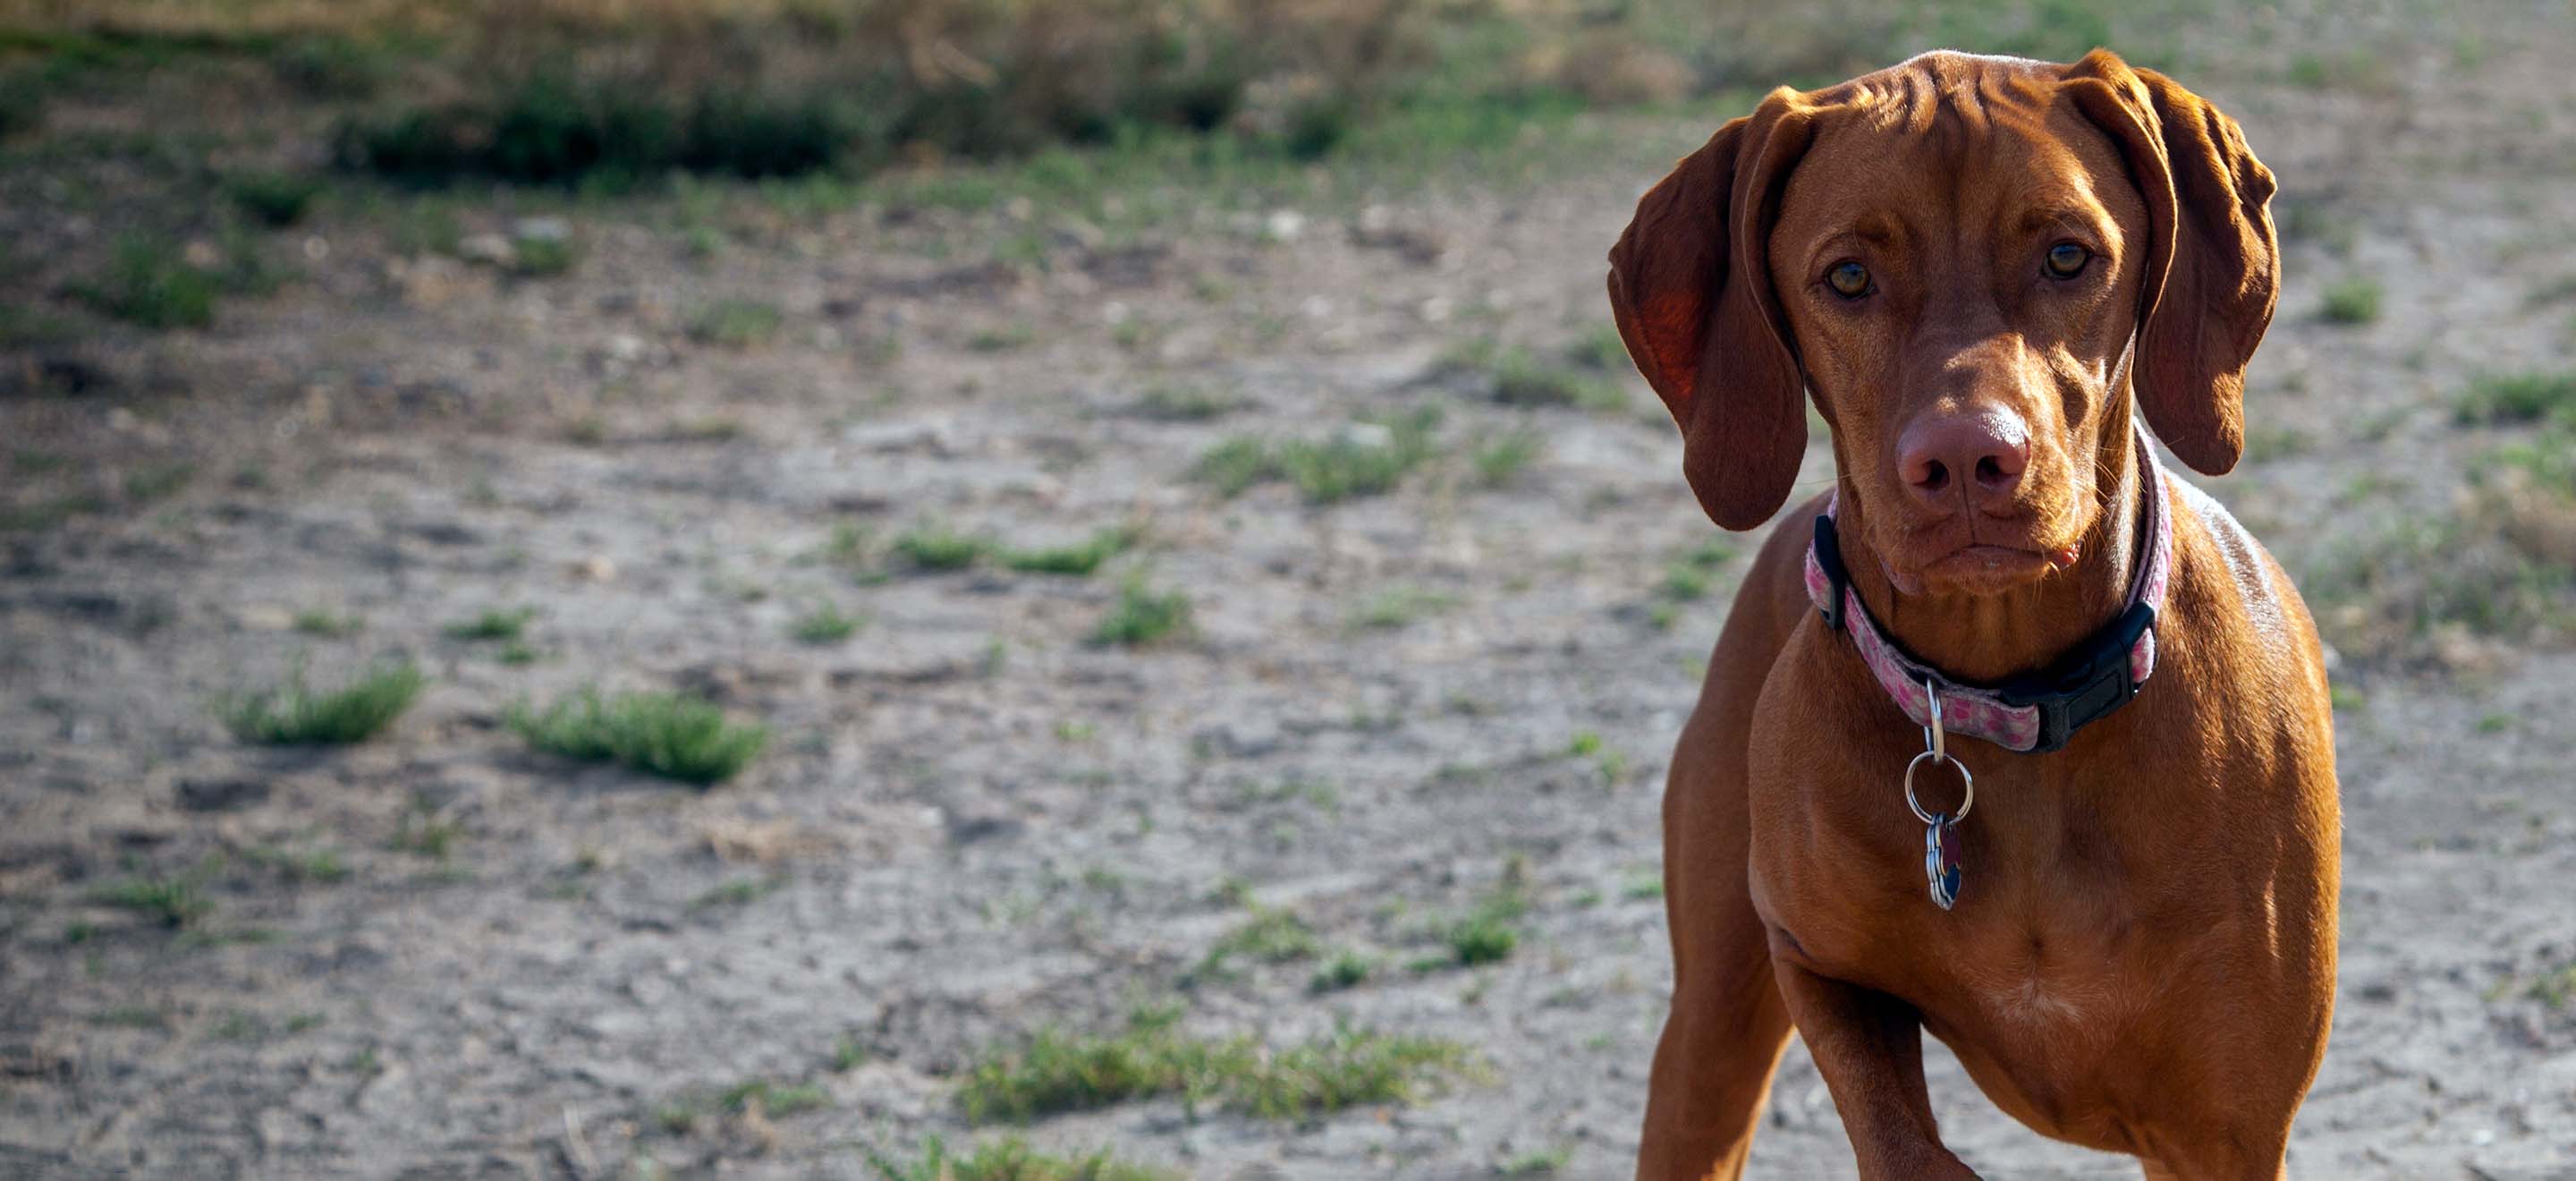 A red Vizsla dog standing in a gravel path image